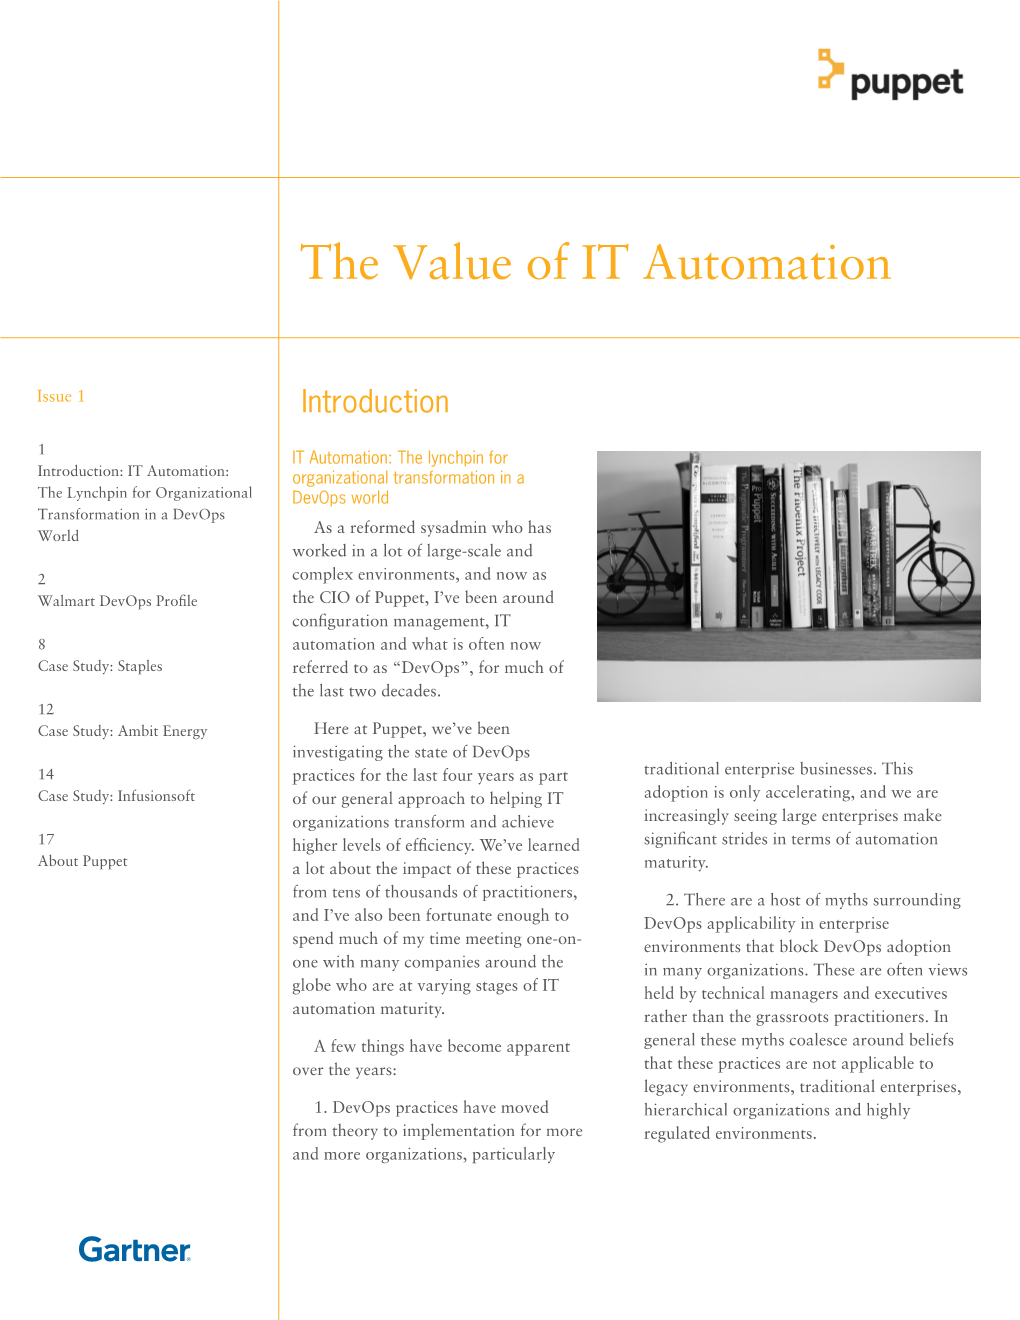 The Value of IT Automation